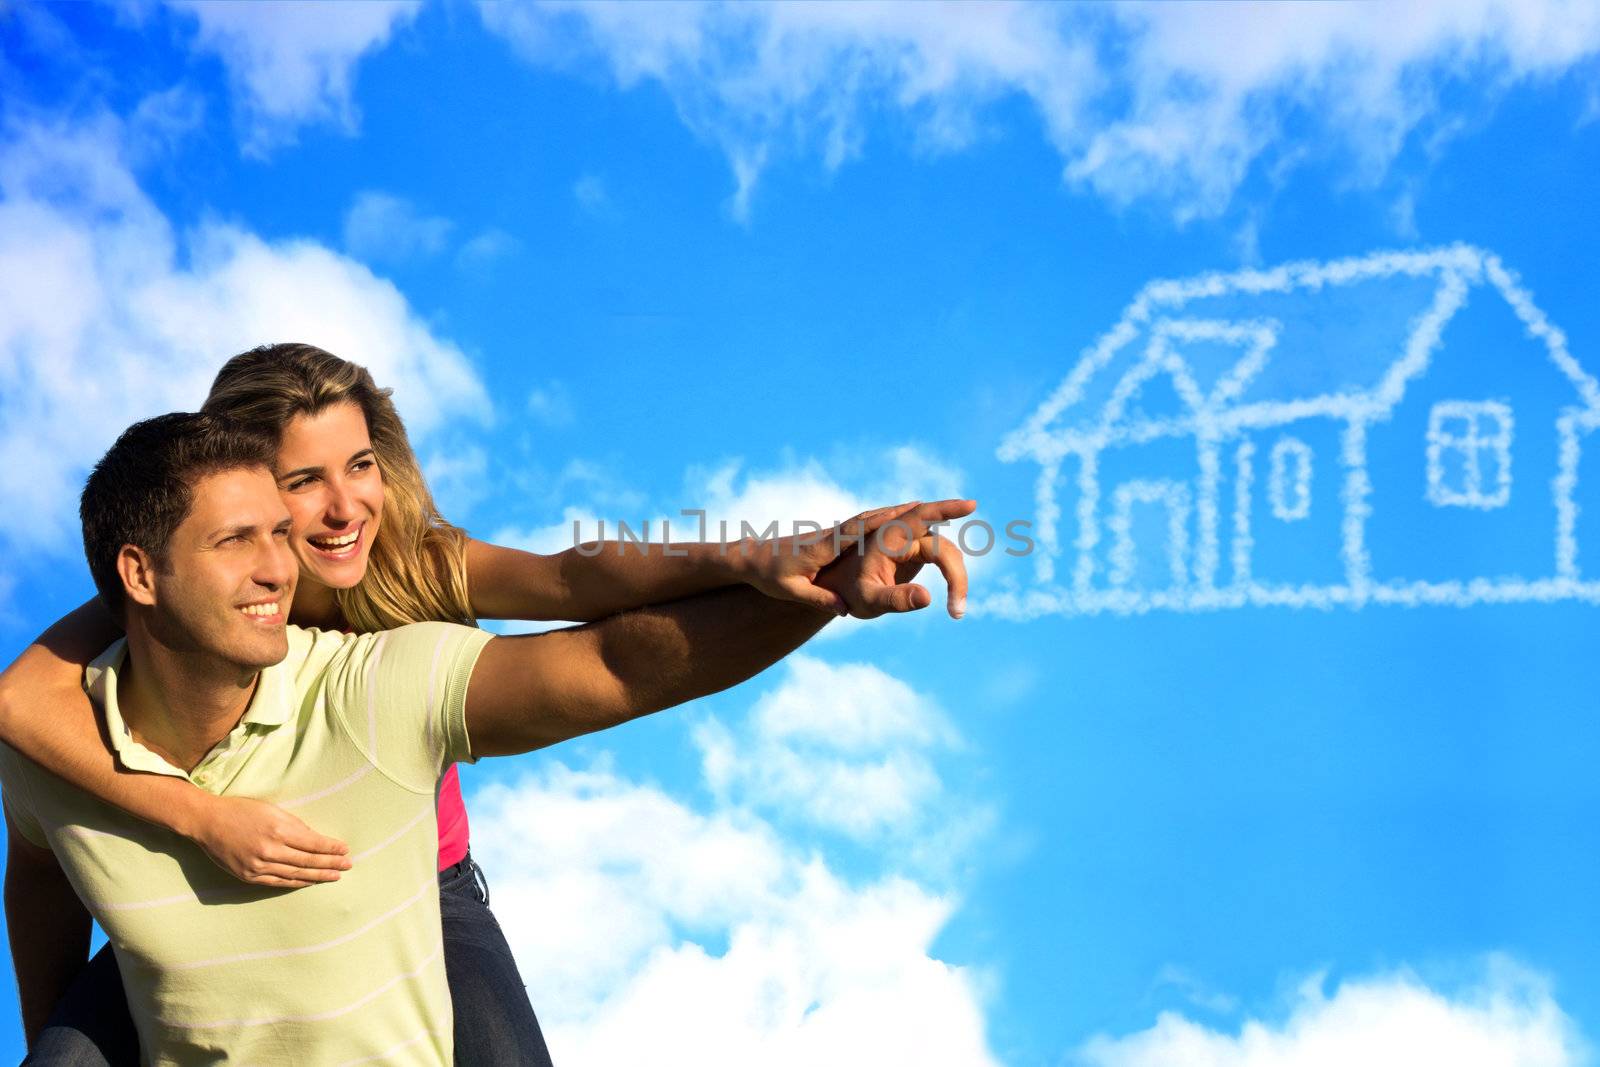 Happy couple under the blue sky enjoying the sun pointing to a house made of clouds.